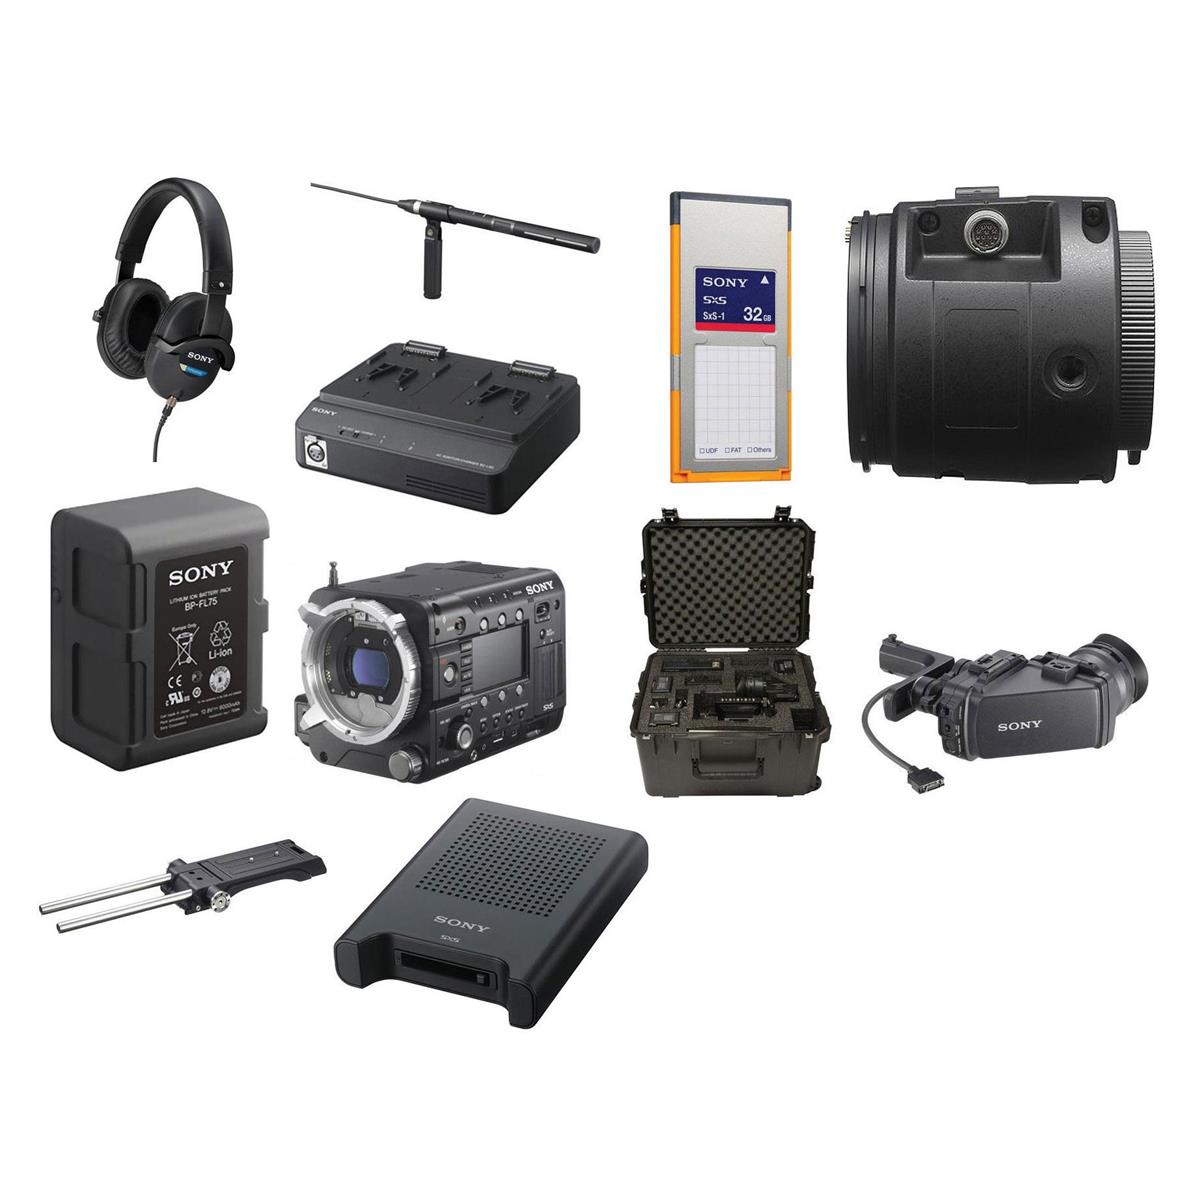 Image of Sony PMW-F5 Documentary Camcorder Kit with DVF-L350 LCD Viewfinder